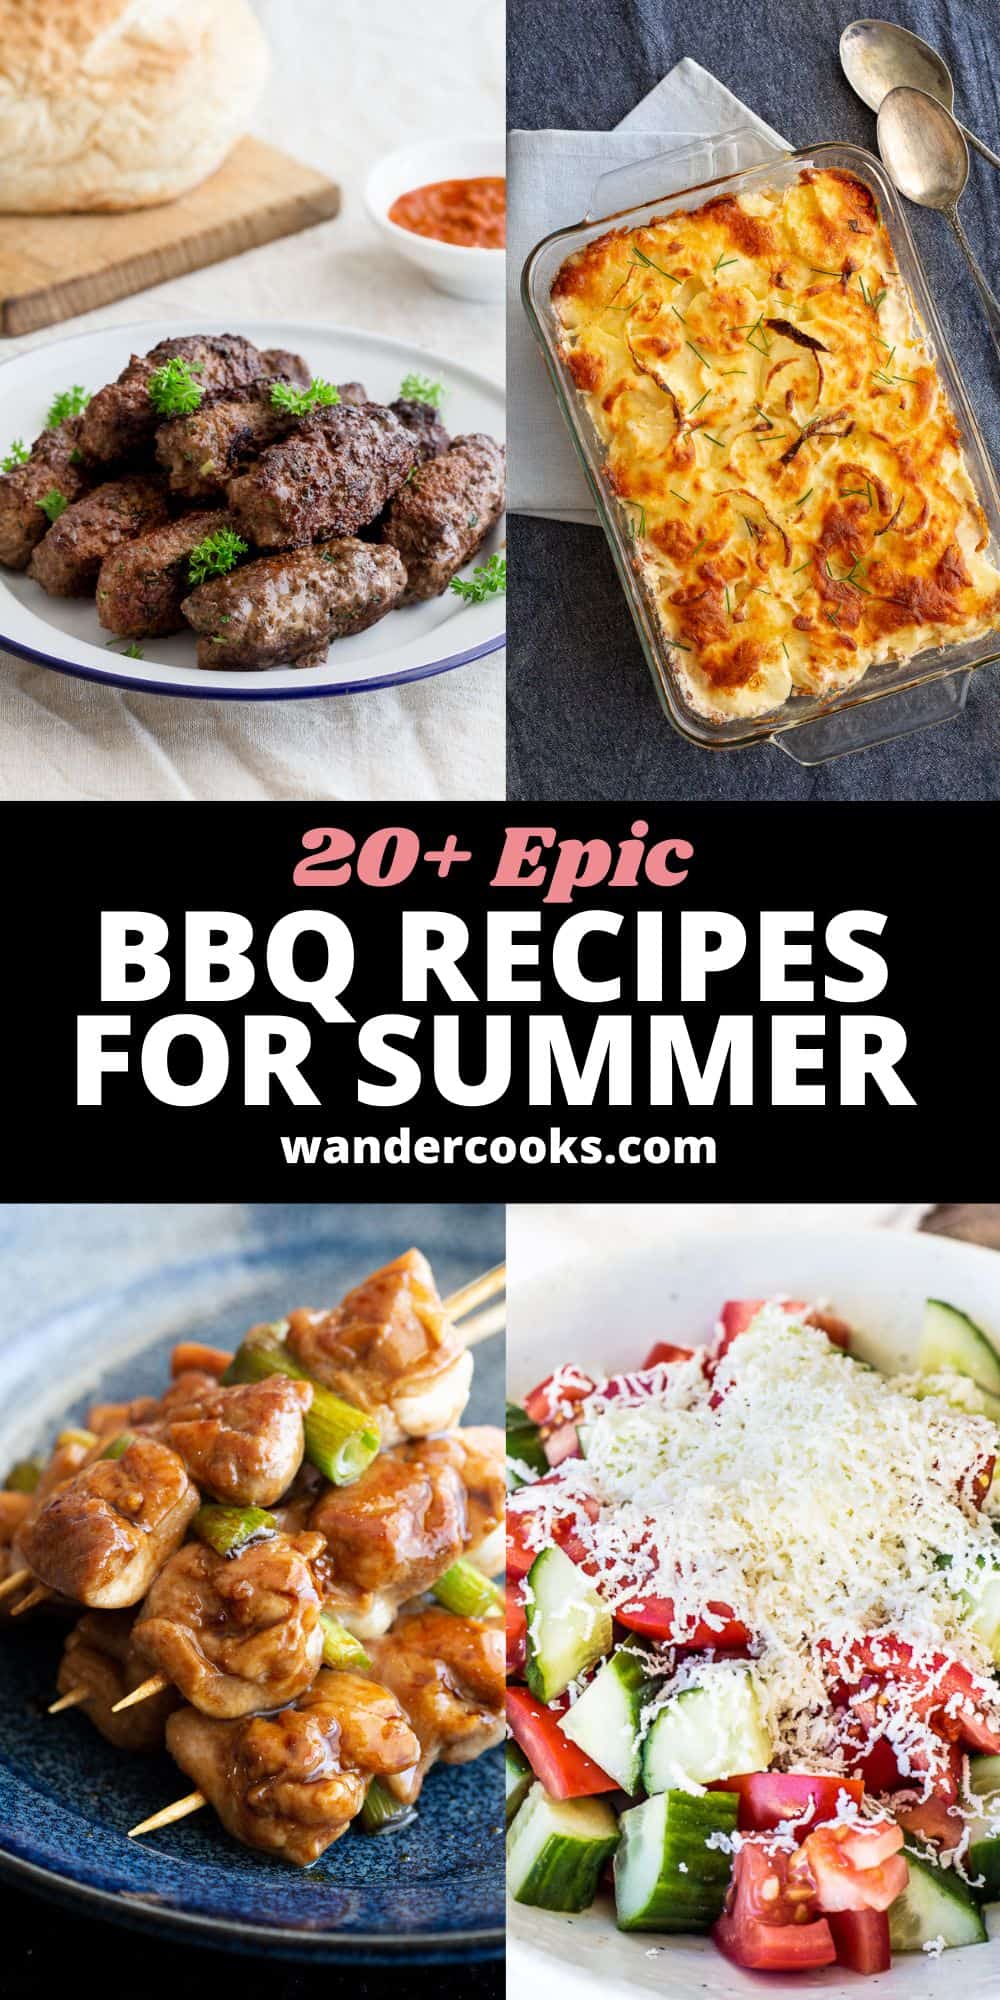 20+ Epic BBQ Recipes You Need This Summer